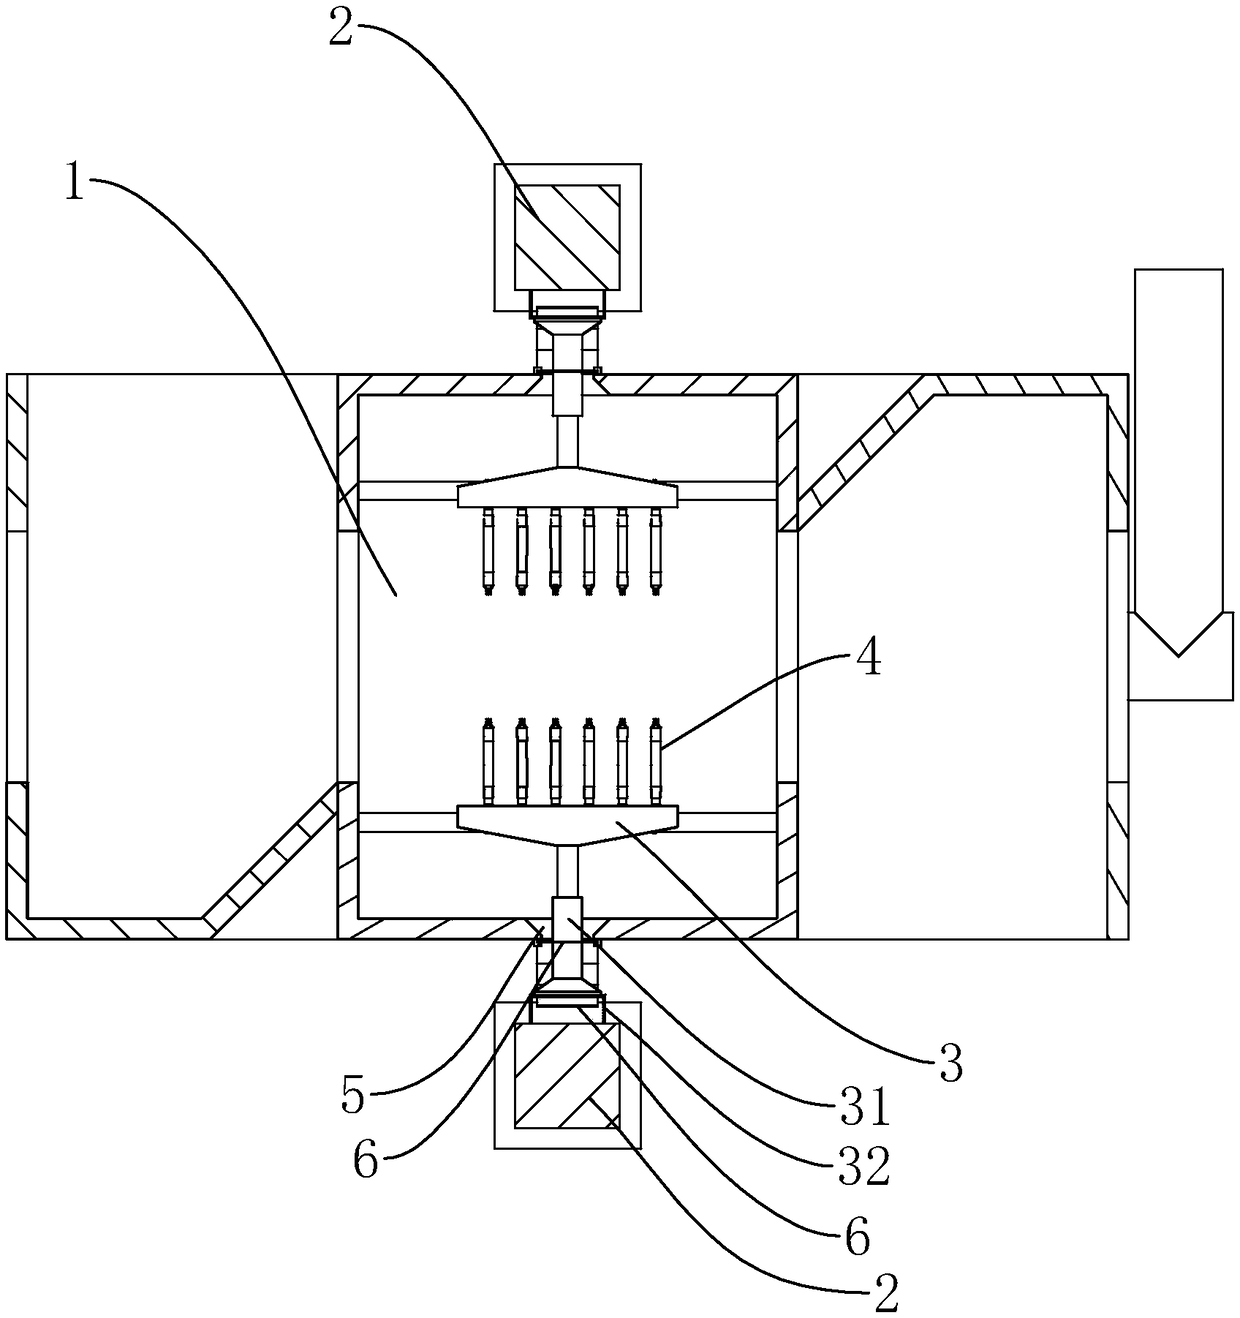 Powder spraying chamber with automatic gun collection beam inlet-outlet groove openings using dynamic sealing structures